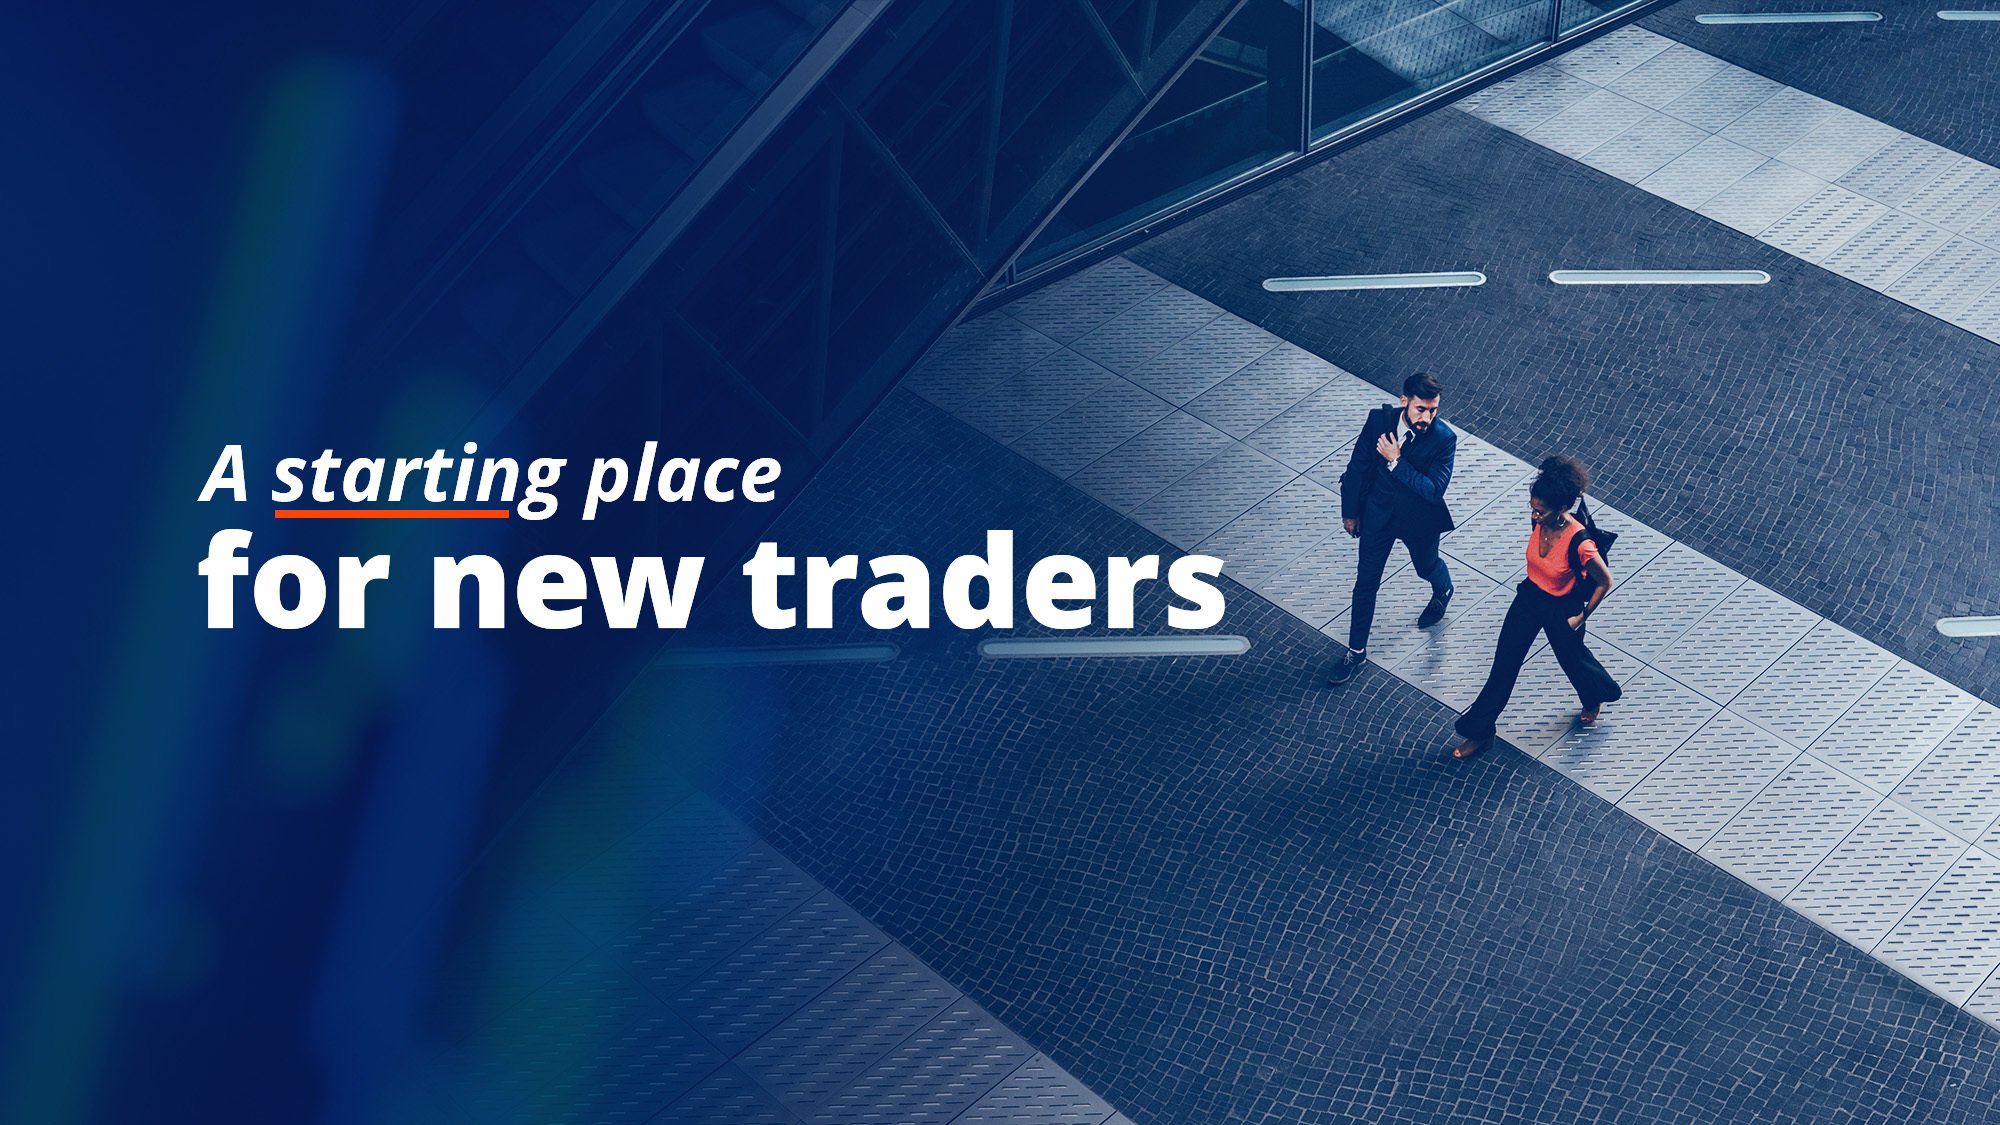 A starting place for new traders